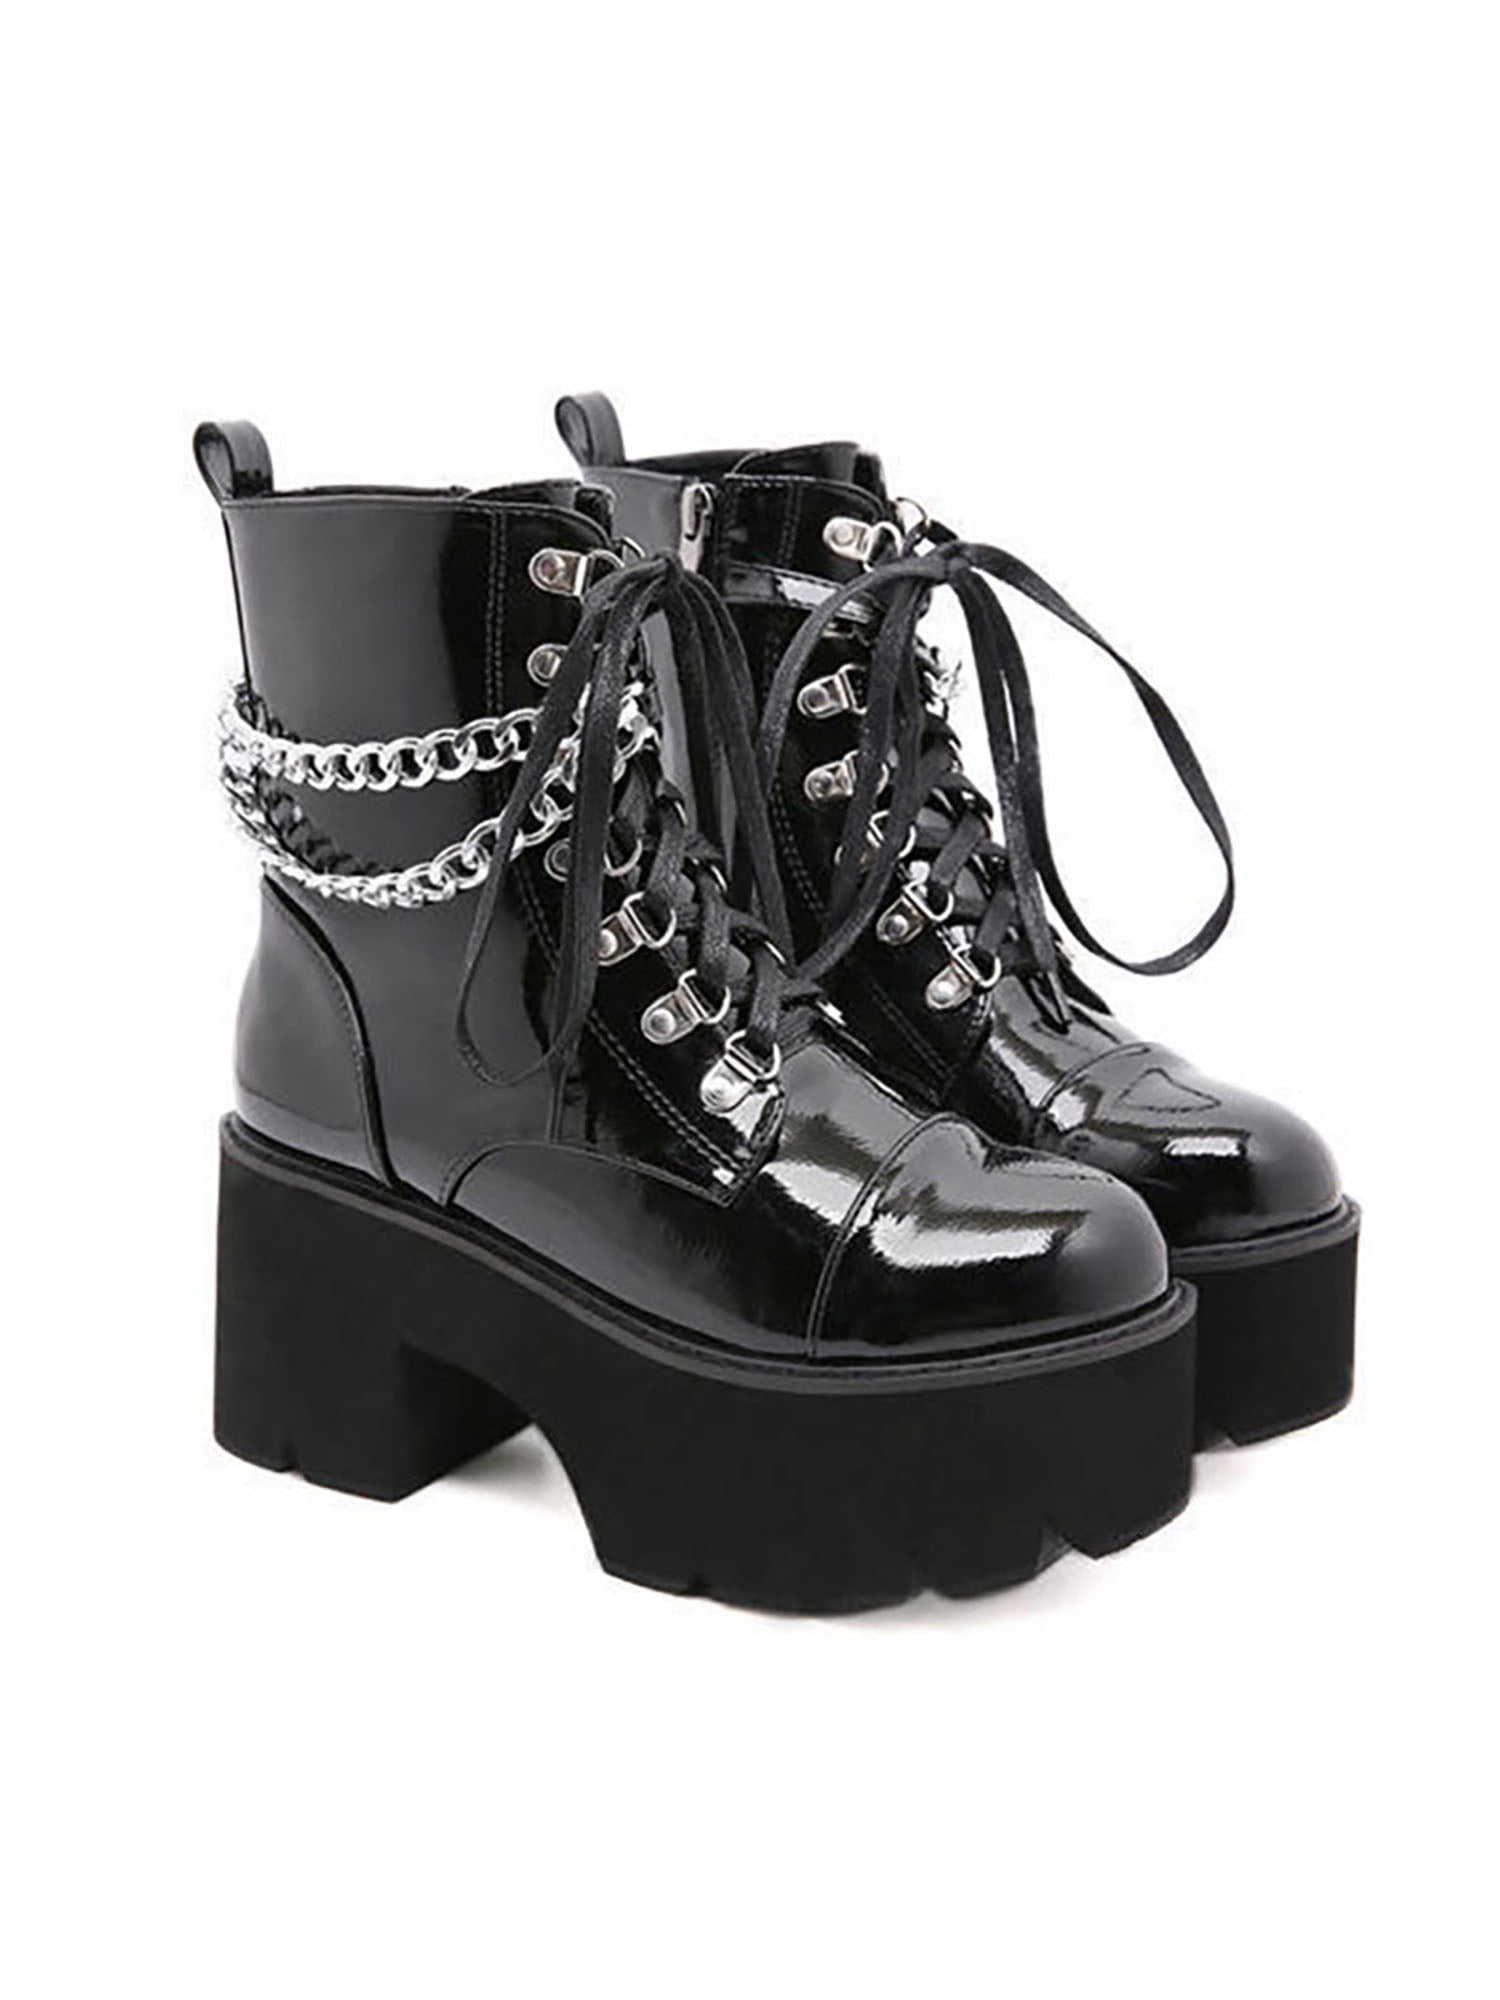 Women Punk Spikes Gothic Buckle Lace Up Riding Combat Ankle Boots Cool Shoes New 